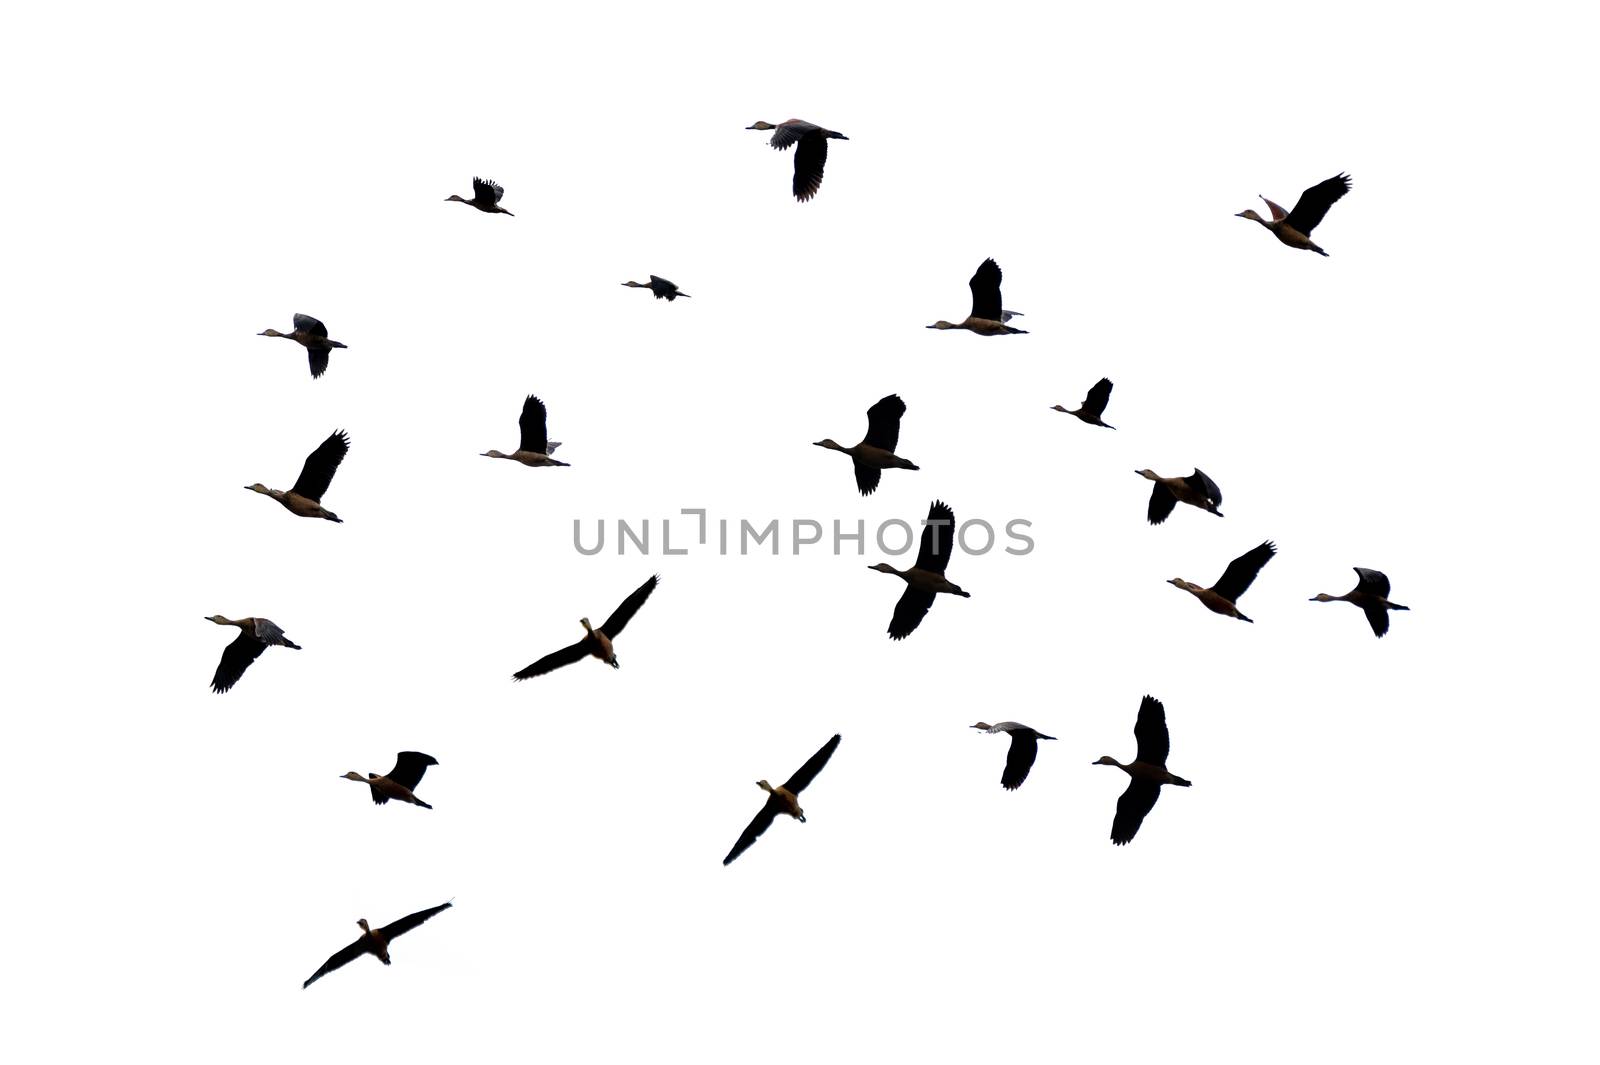 A group of birds flying on a white background Isolate by sarayut_thaneerat